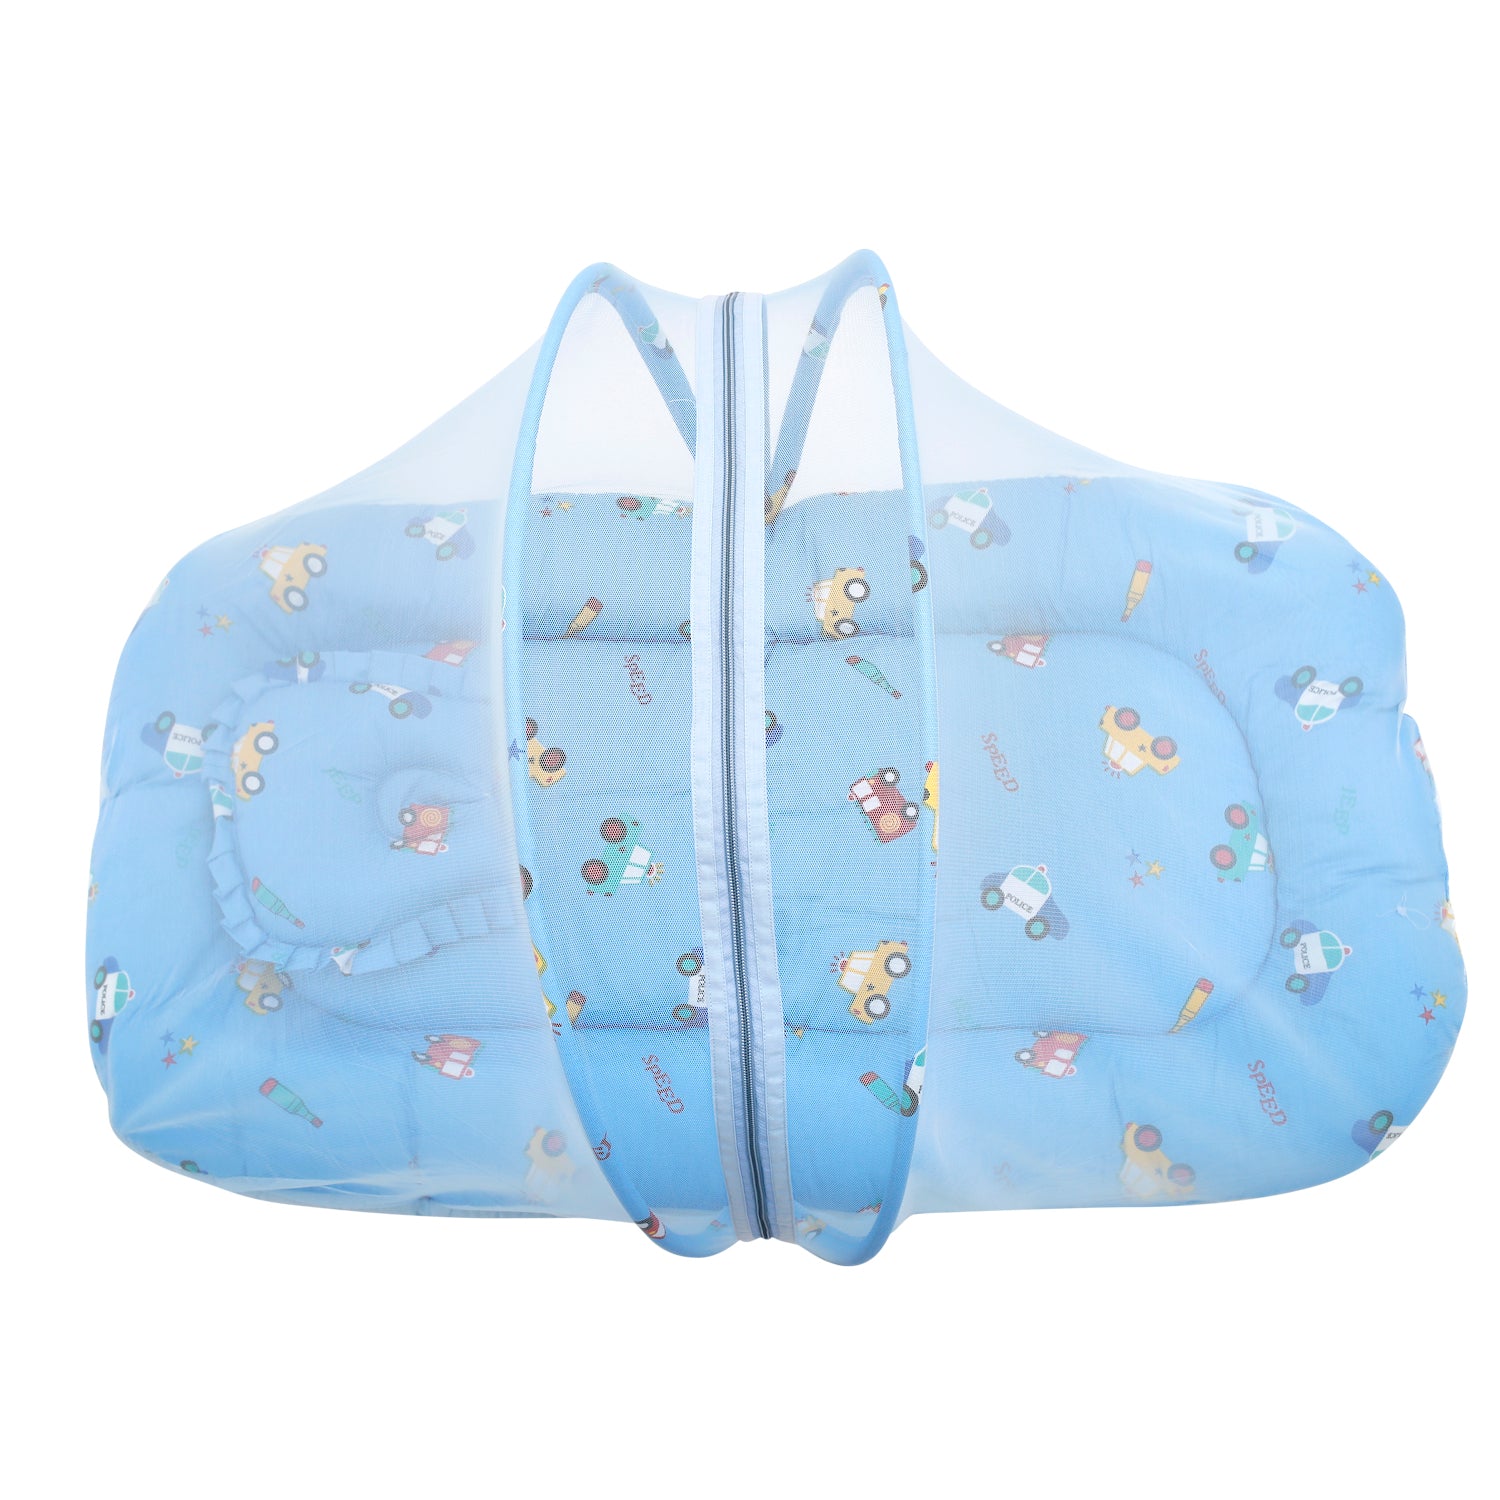 Mosquito Net Tent Mattress Set With Neck Pillow Catch Me If You Can Blue - Baby Moo